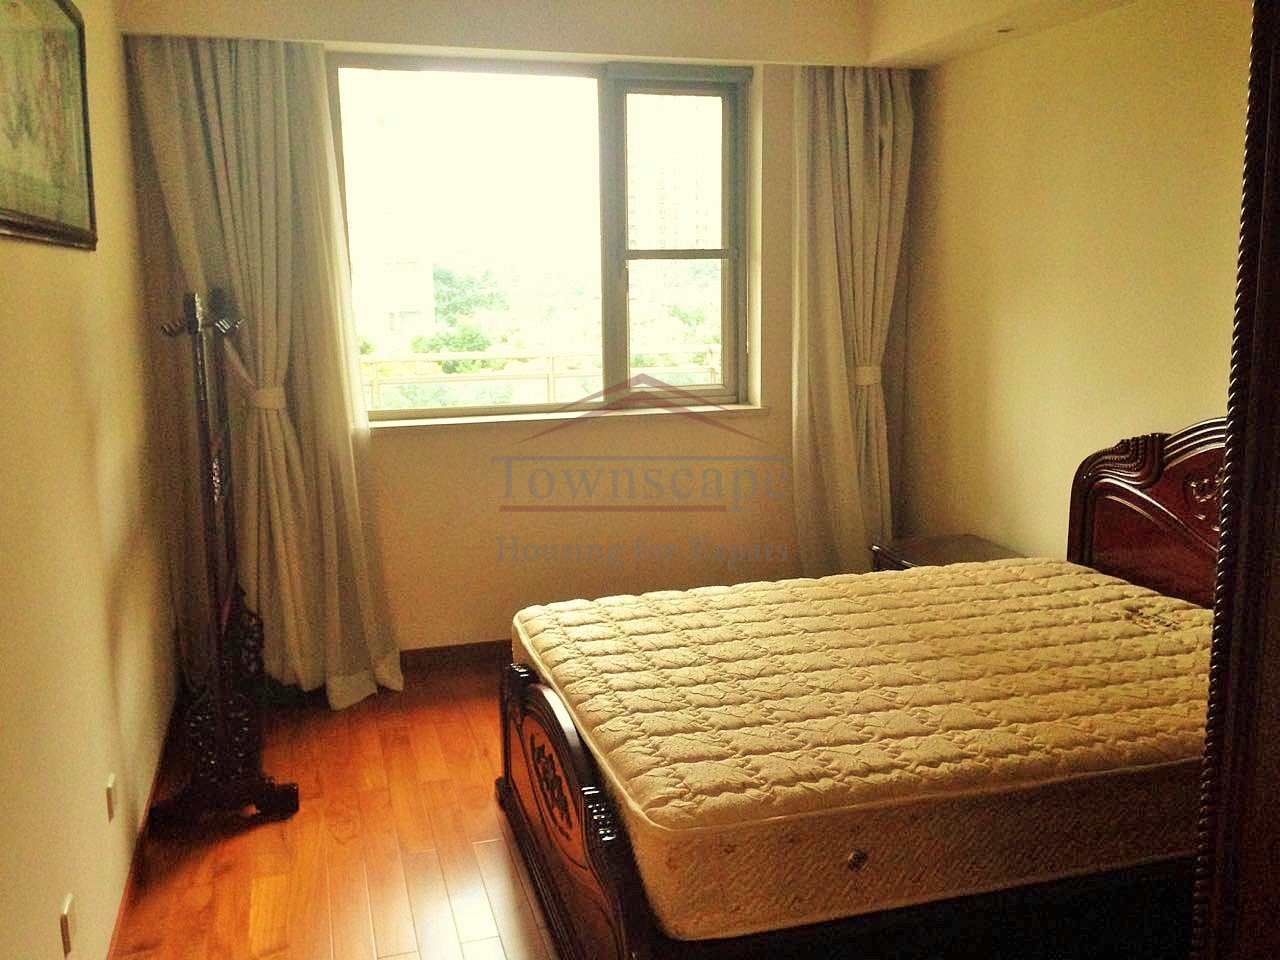 Shanghai apartment nea rSouth Waigaoqiao free trade zone large 4 bedroom apartment in Pudong area, line 6